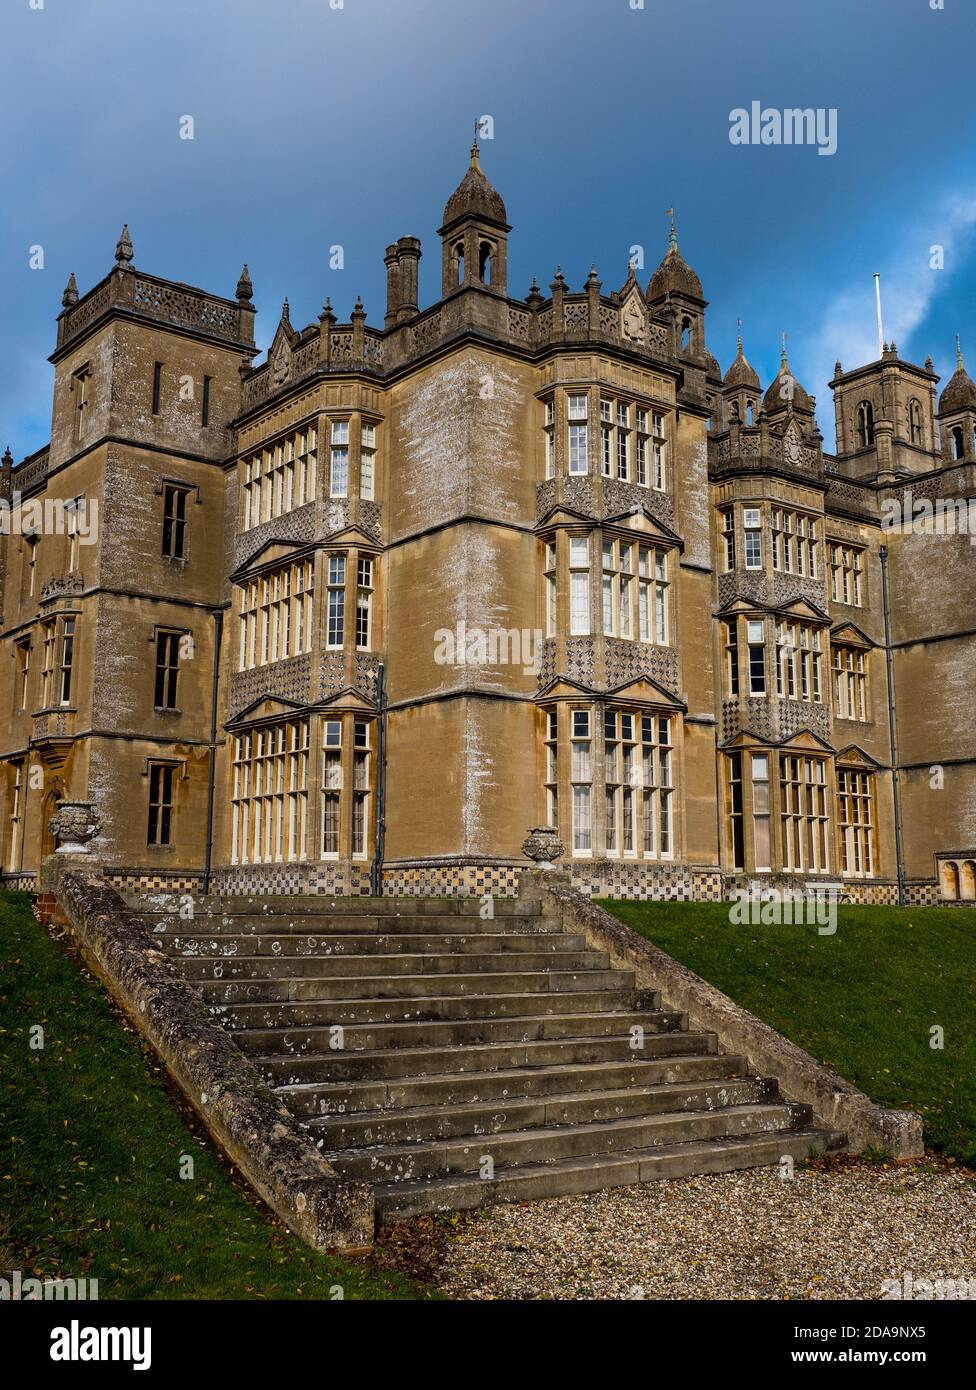 Drammatico Brooding Country House, Englefield House, Englefield Estate, Thale, Reading, Berkshire, Inghilterra, UK, GB. Foto Stock